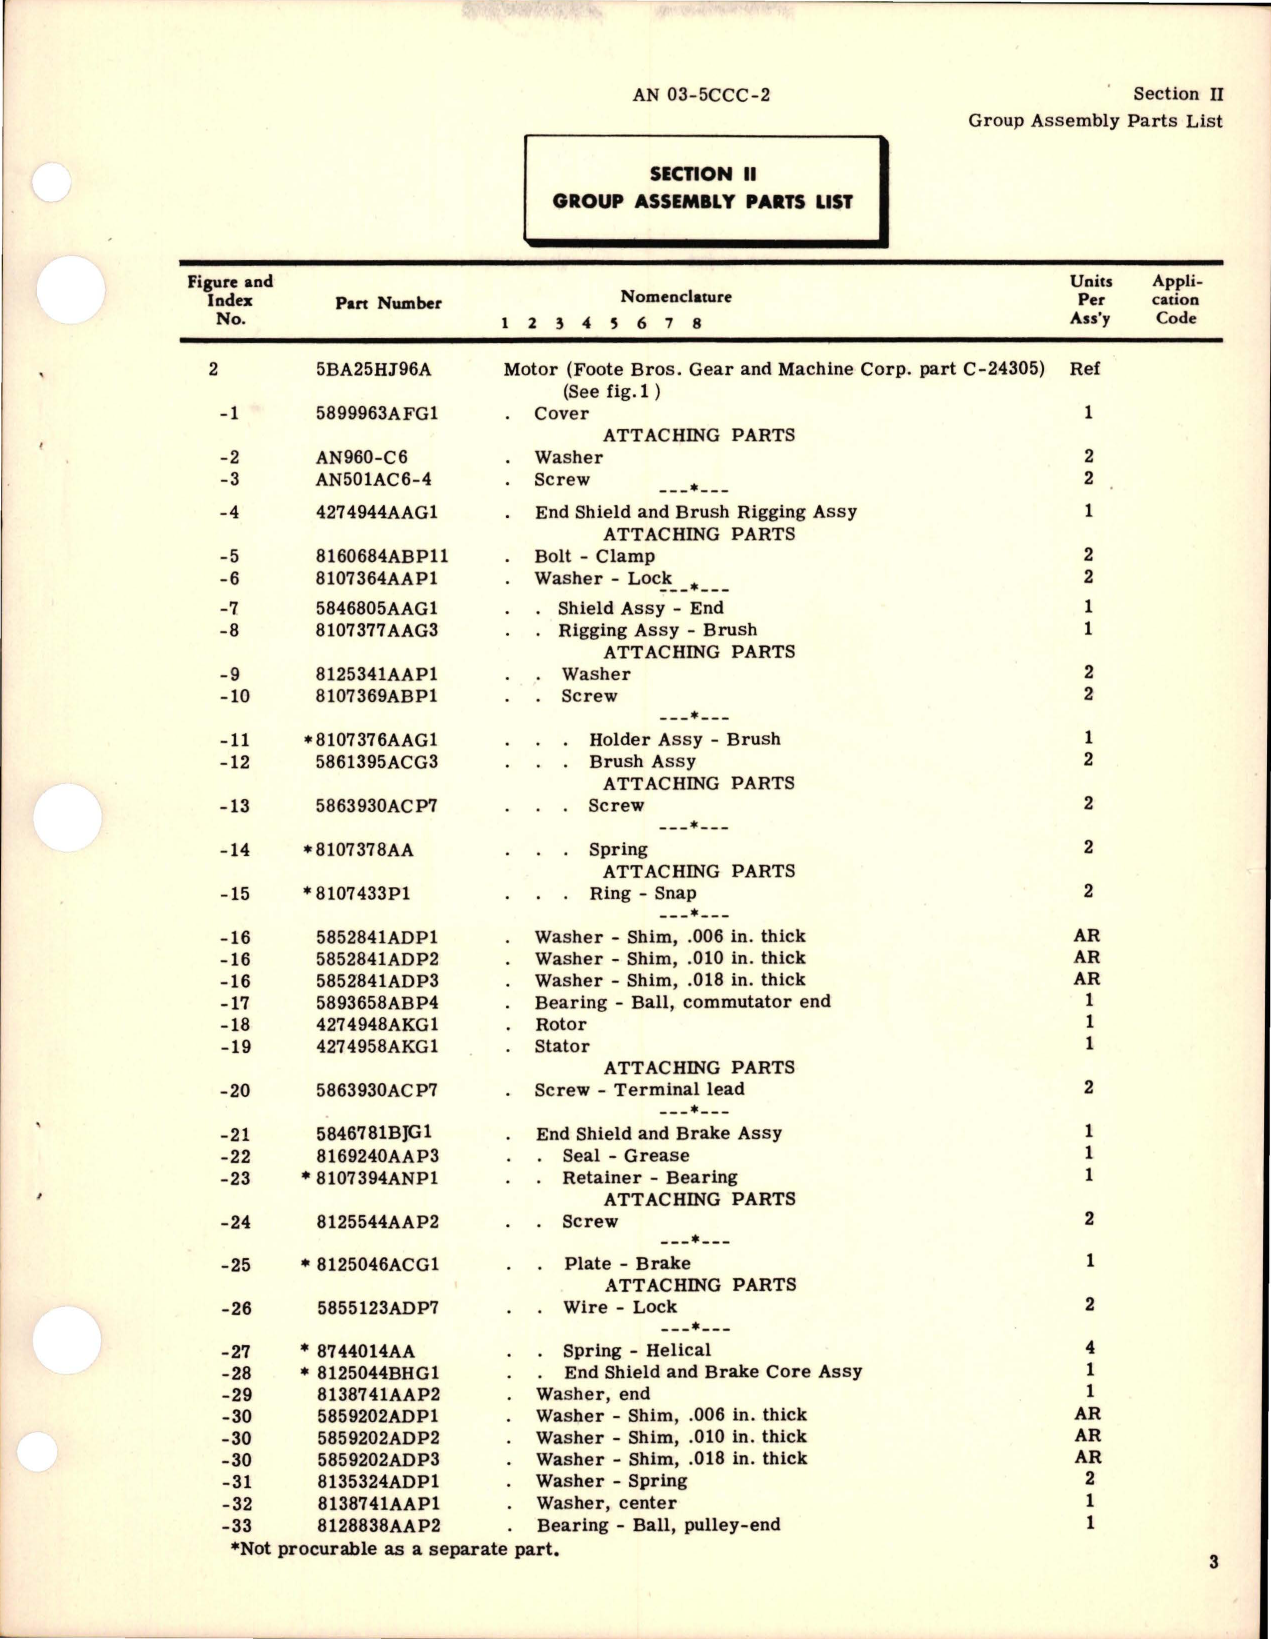 Sample page 5 from AirCorps Library document: Parts Catalog for Aircraft Motors - Part C-24305